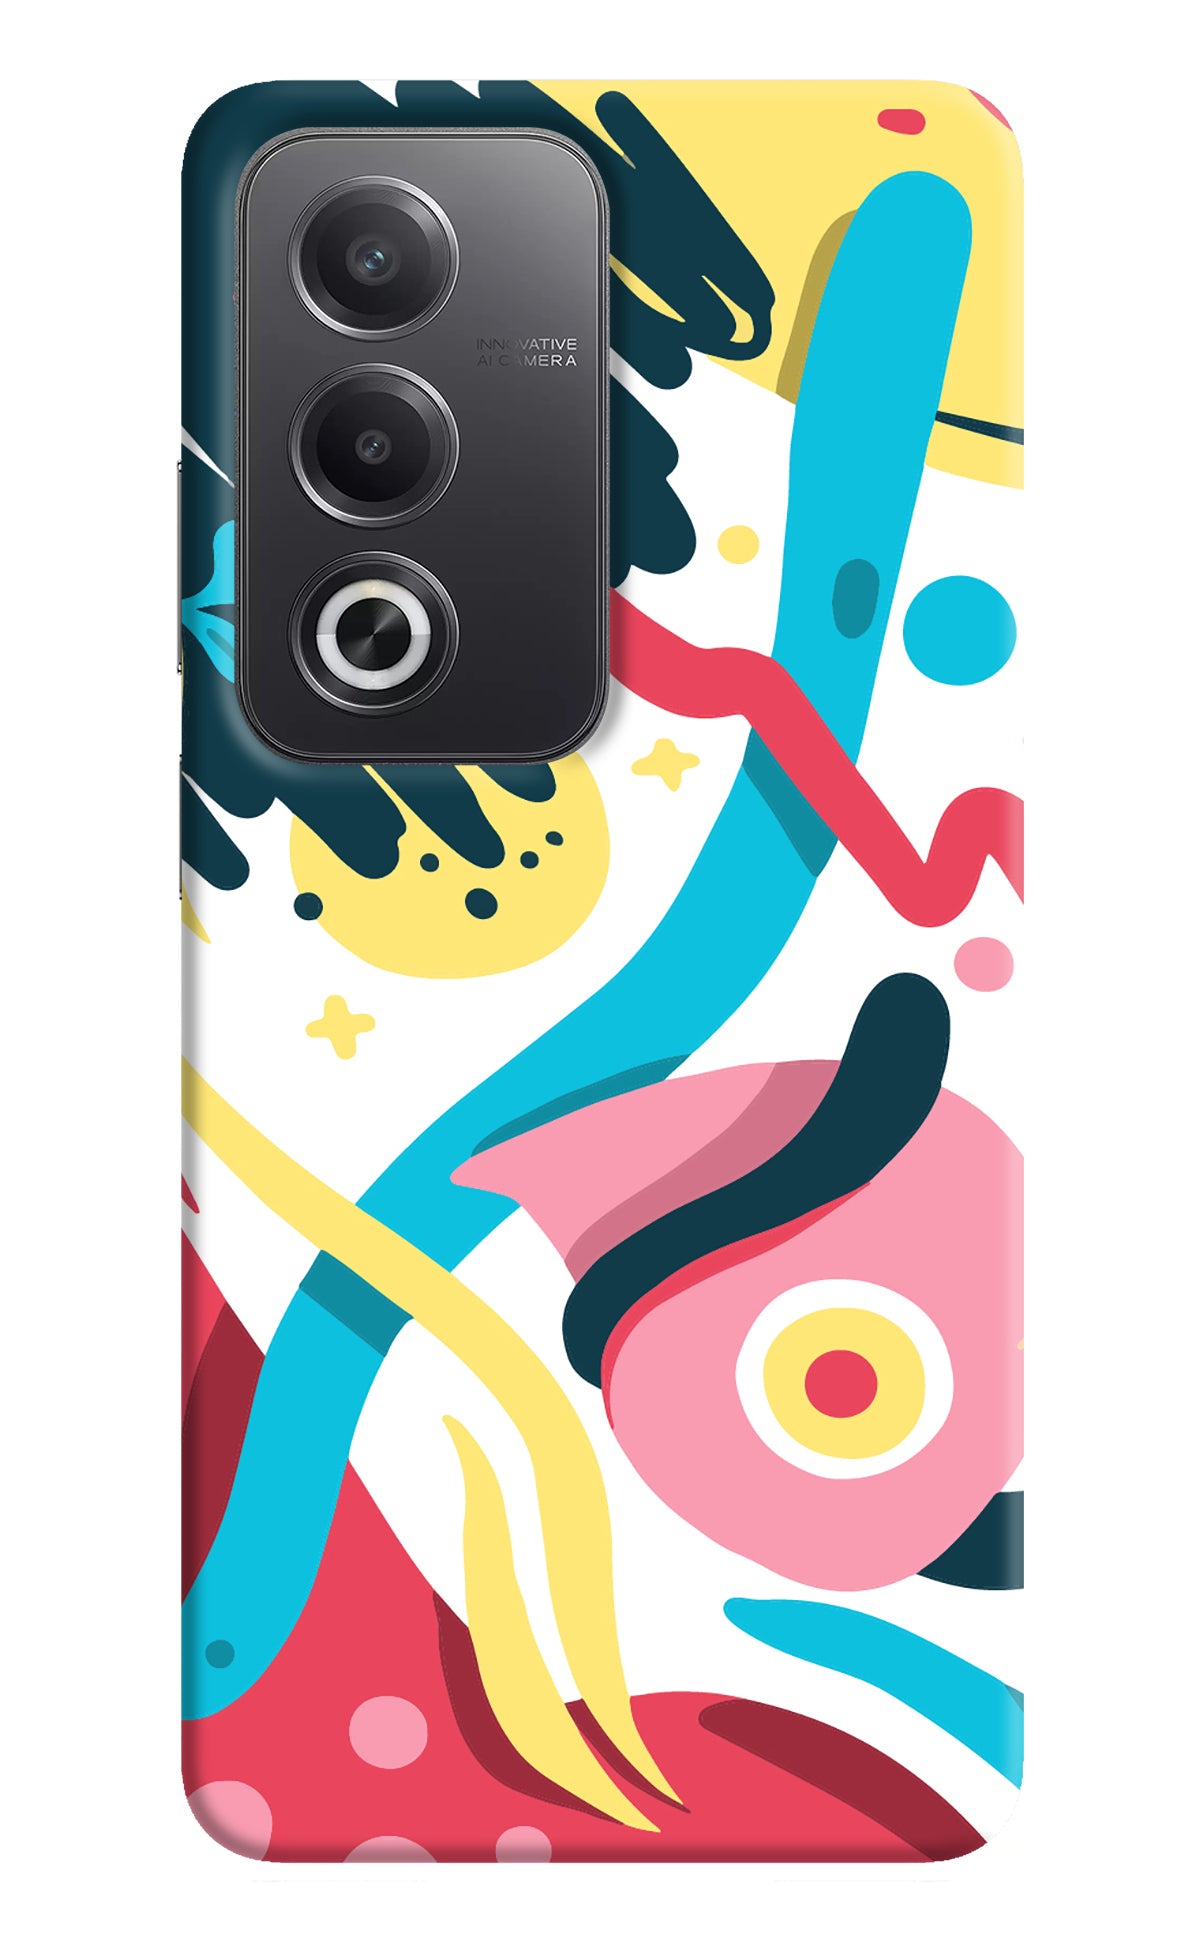 Trippy Oppo A3 Pro 5G Back Cover